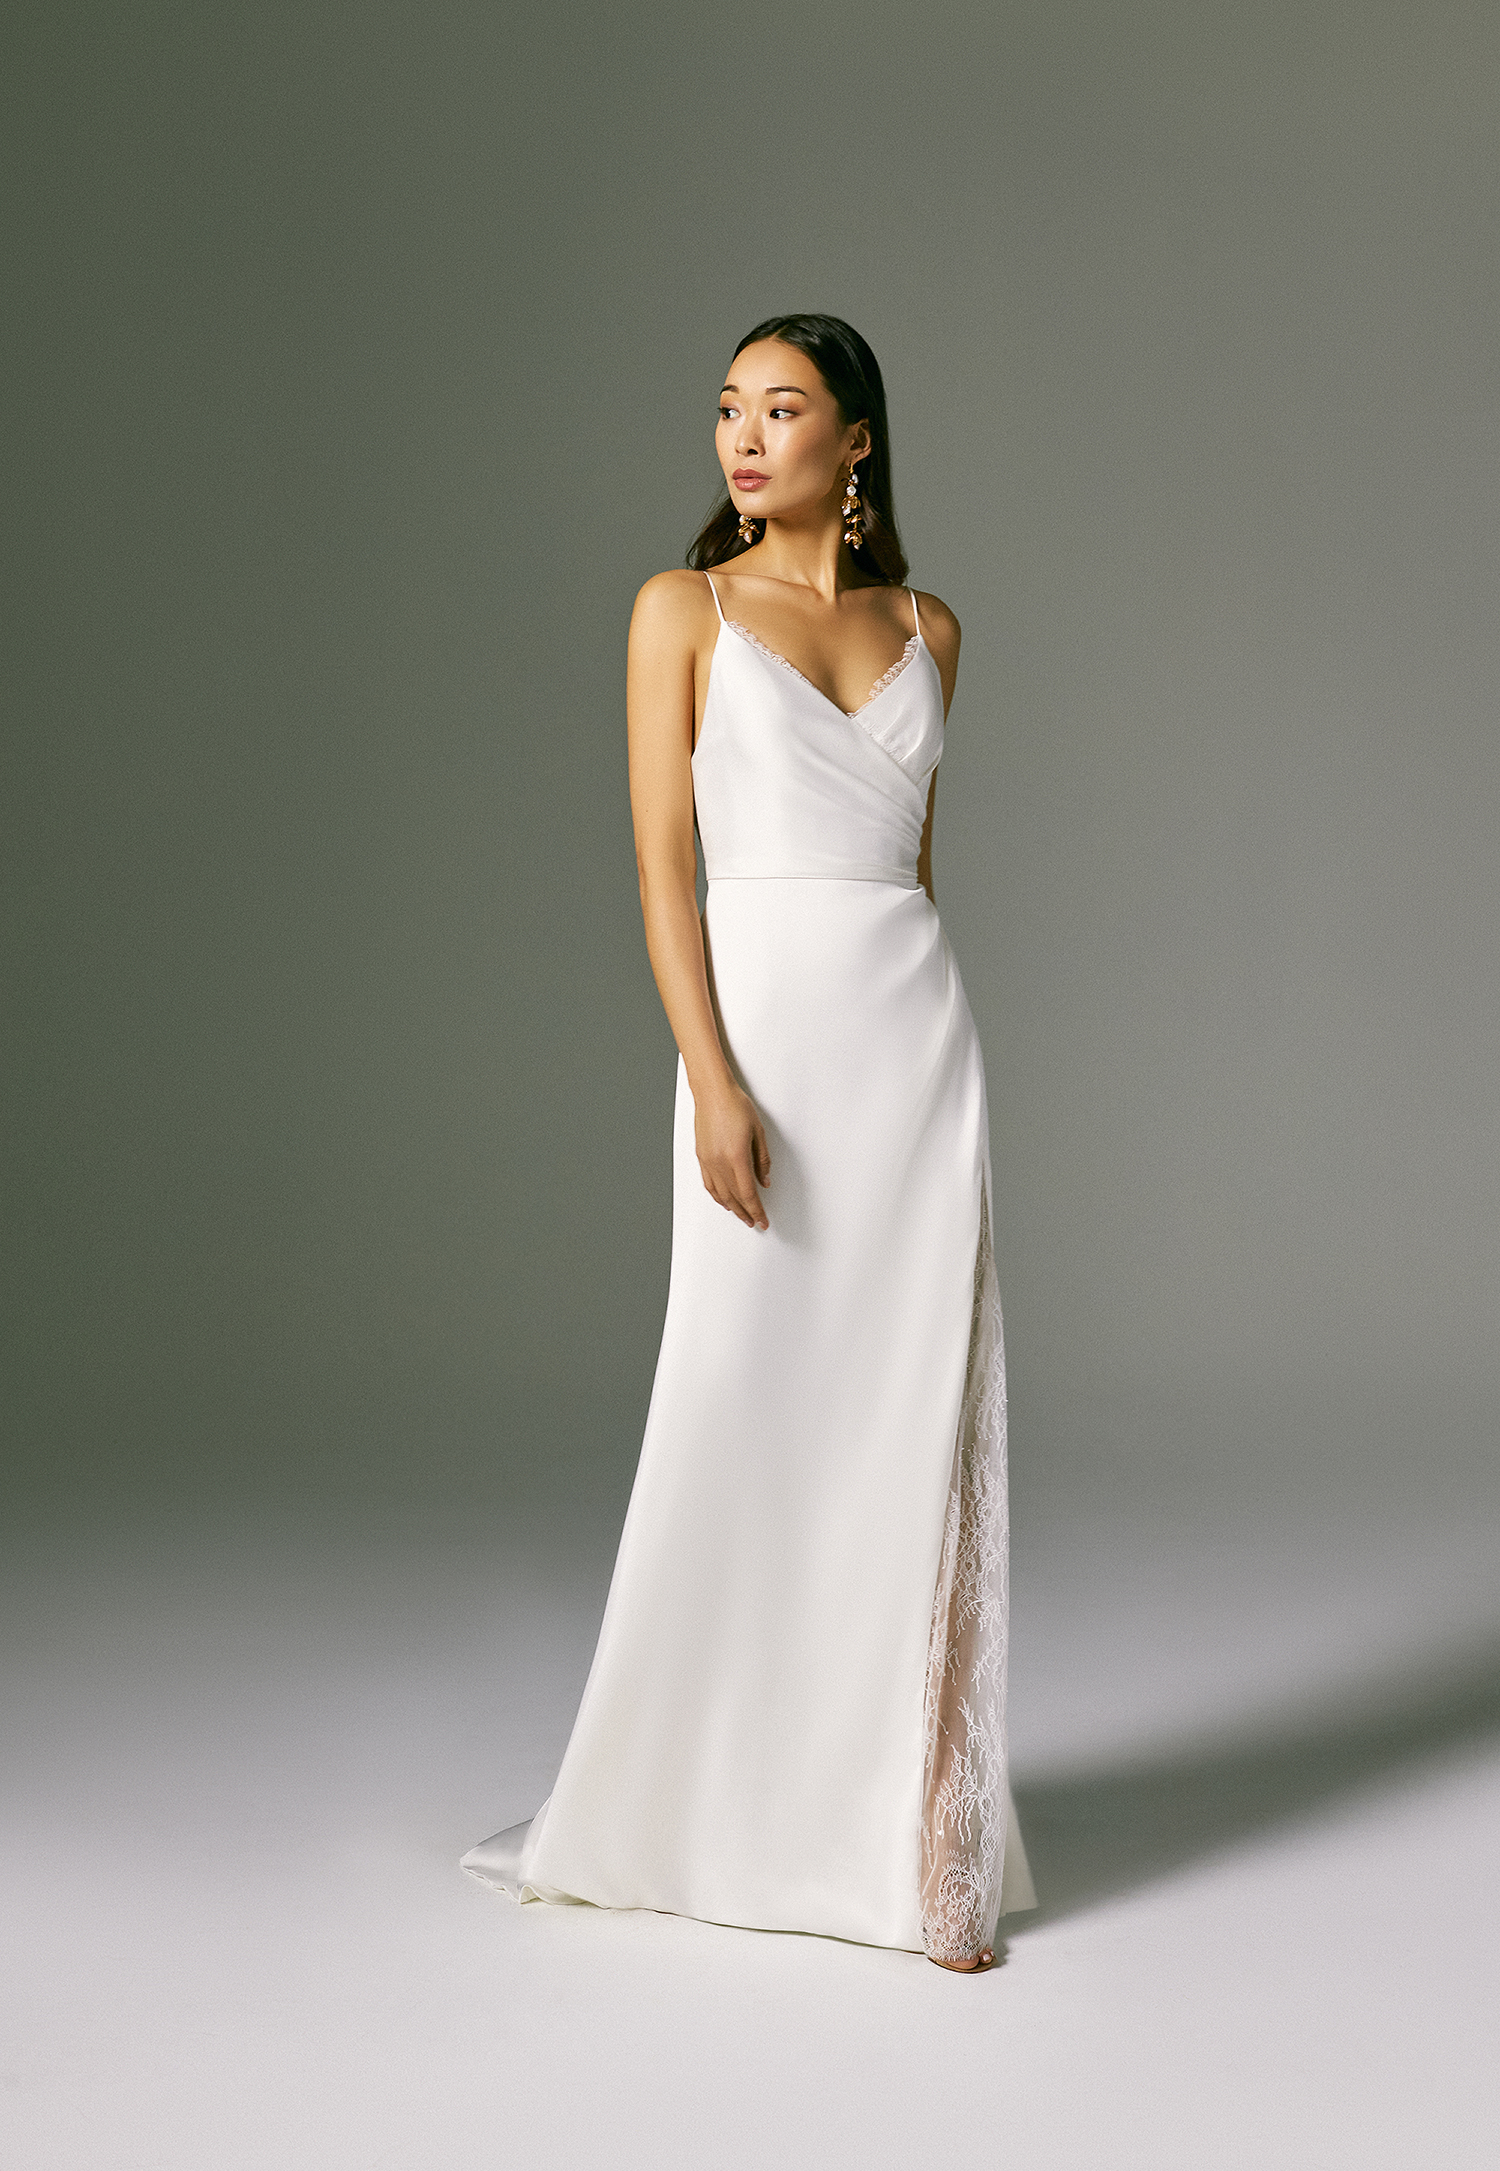 Gia: Savannah Miller Trunk Show From Reopening until 29 October, Bluebell  Bridal